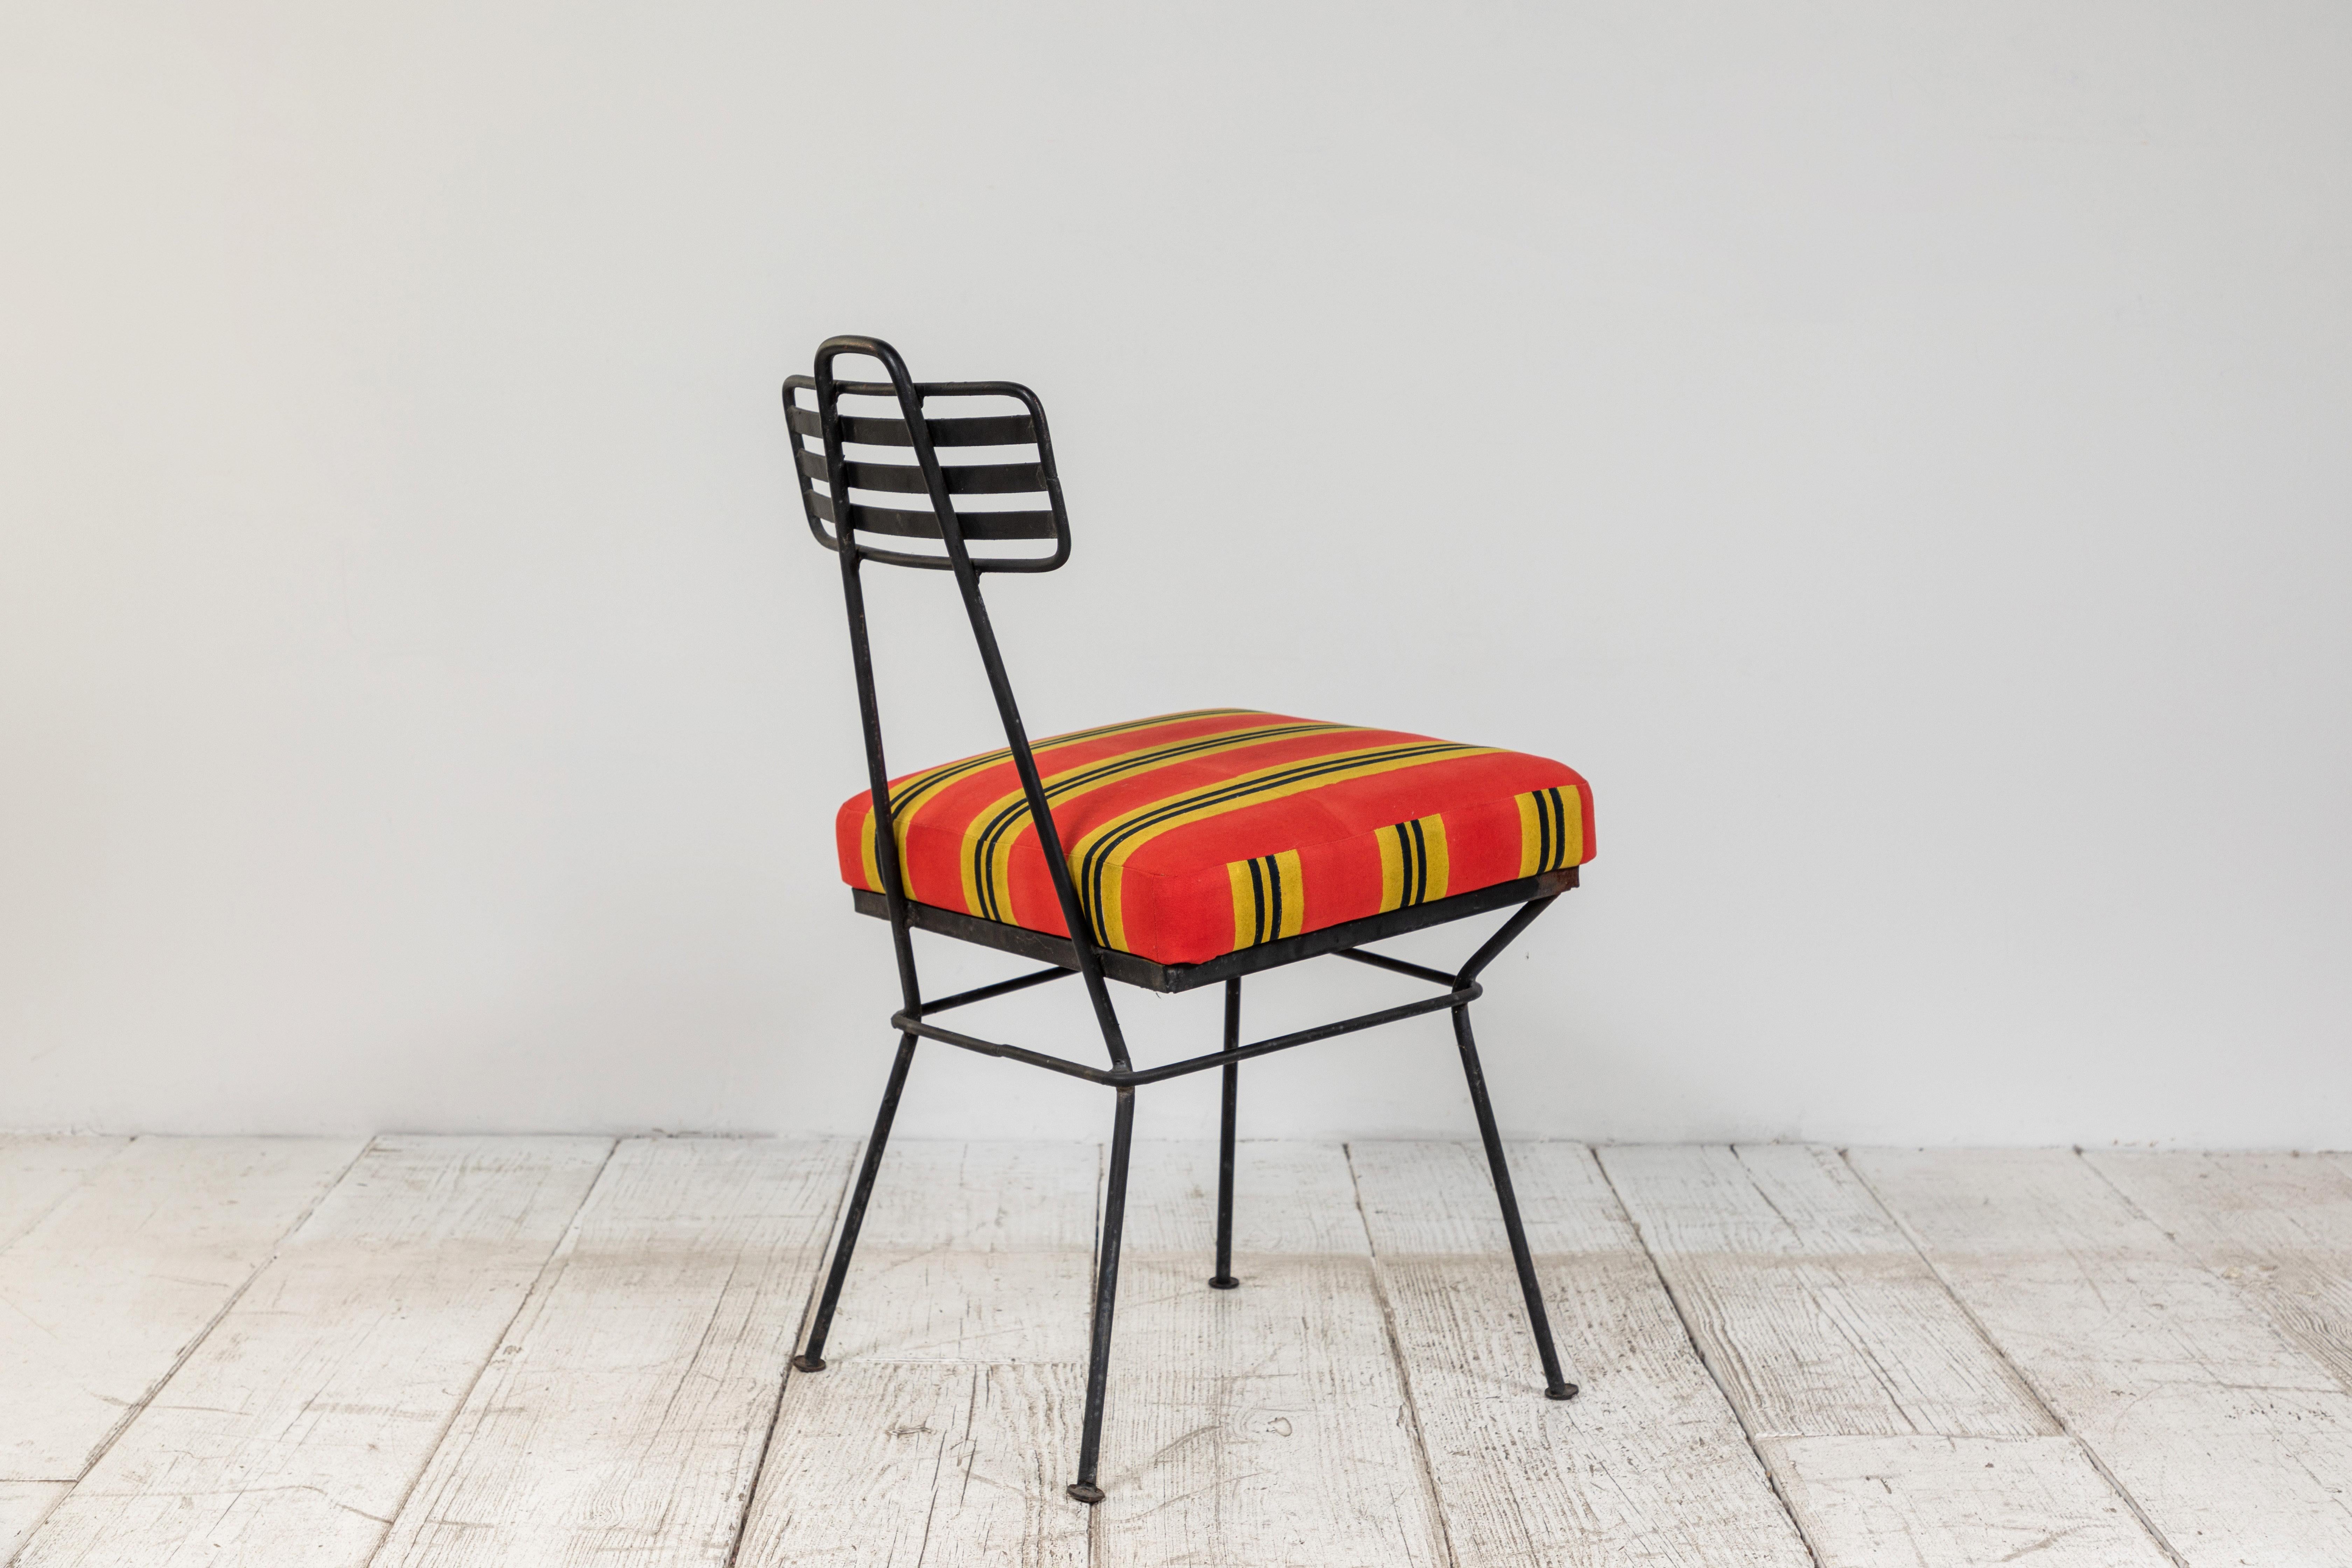 Late 20th Century French Black Metal Chair with Striped Fabric